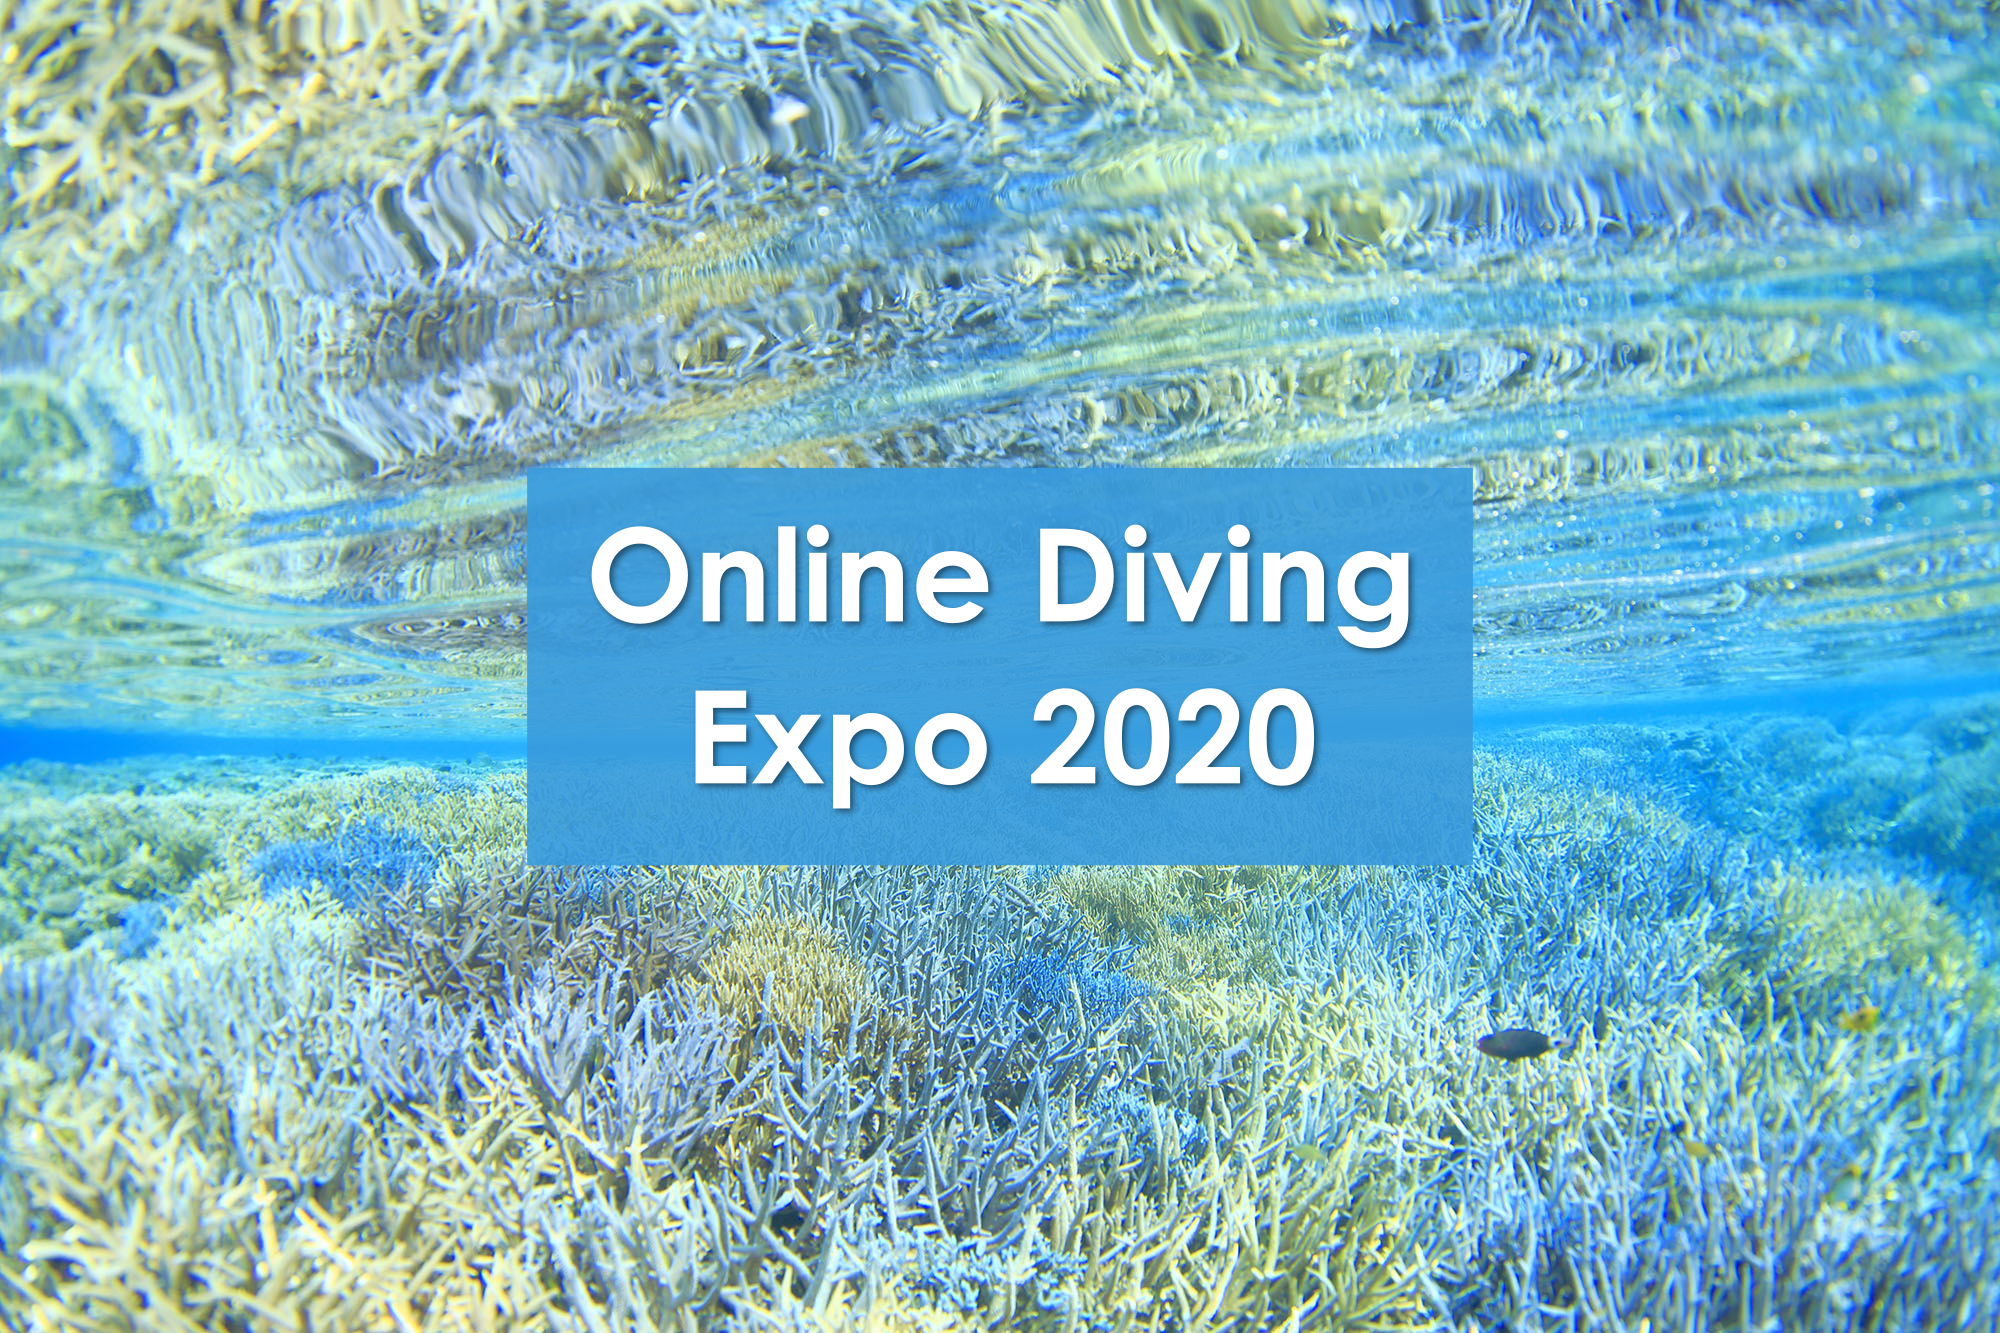 Online Diving Expo 2020